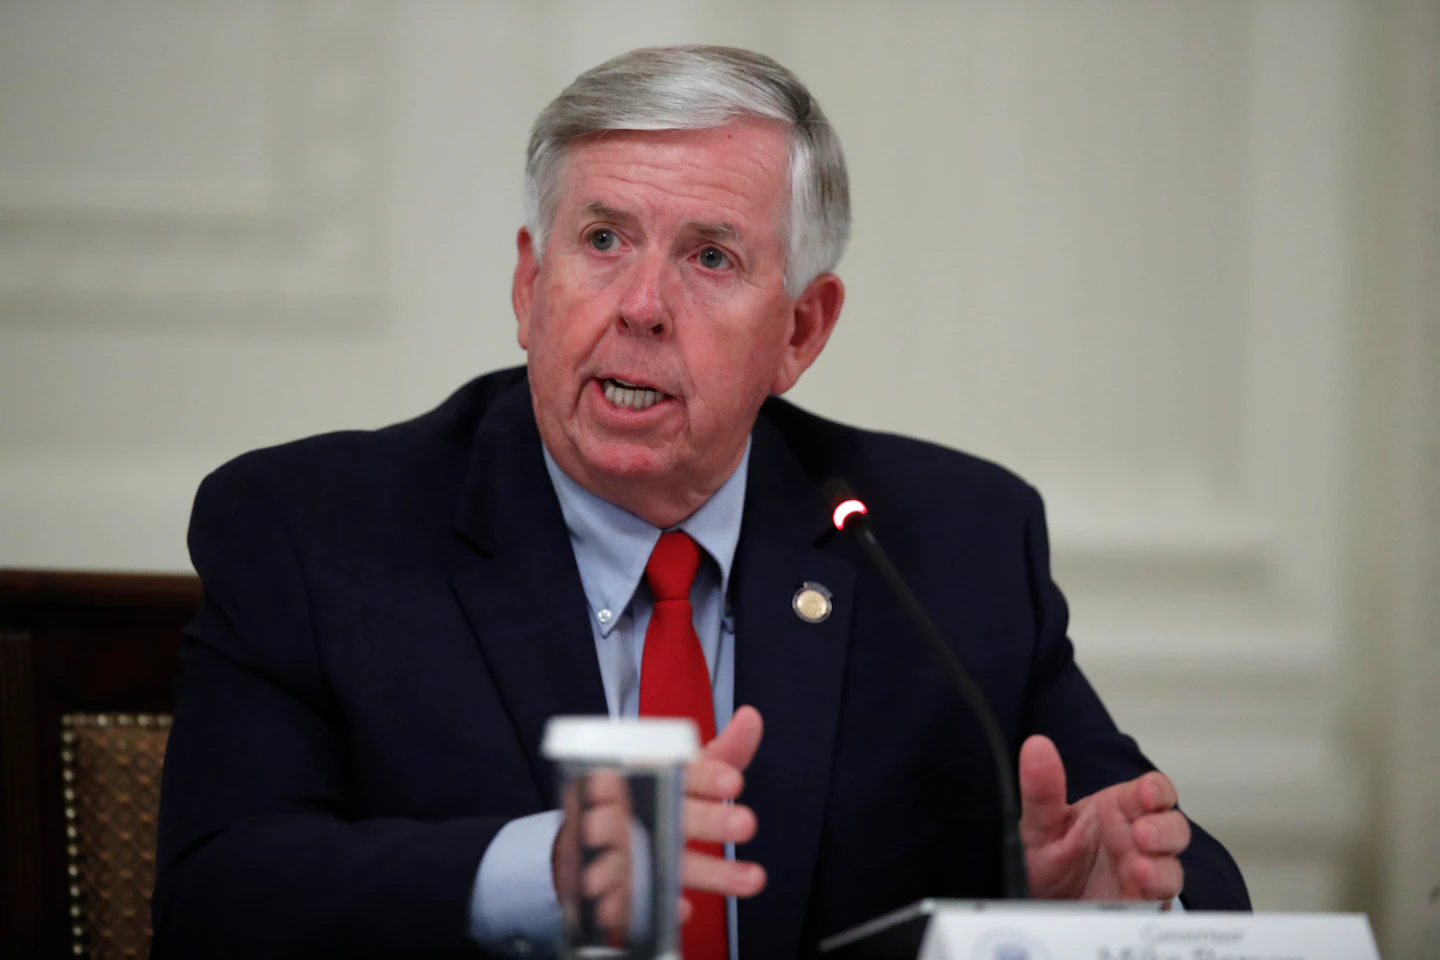 Missouri Gov. Mike Parson calls St. Louis Post-Dispatch journalist who warned about cybersecurity flaw 'a hacker' - The Washington Post